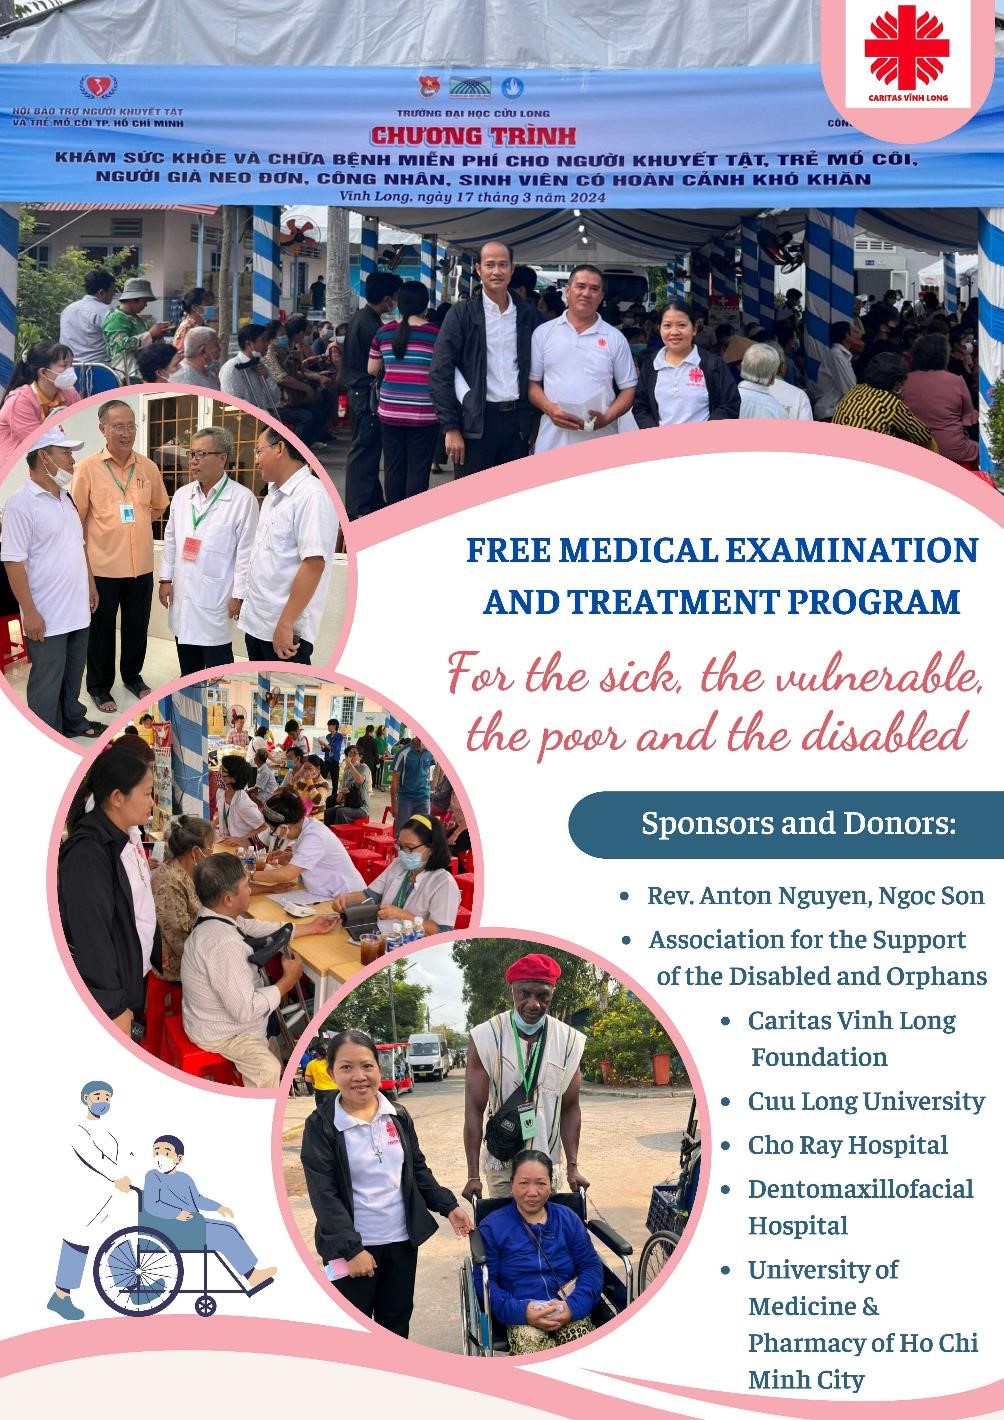 Caritas Vinh Long Foundation: Free Medical Examination and Treatiment Program For the sick, the vulnerable, the poor and the disabled